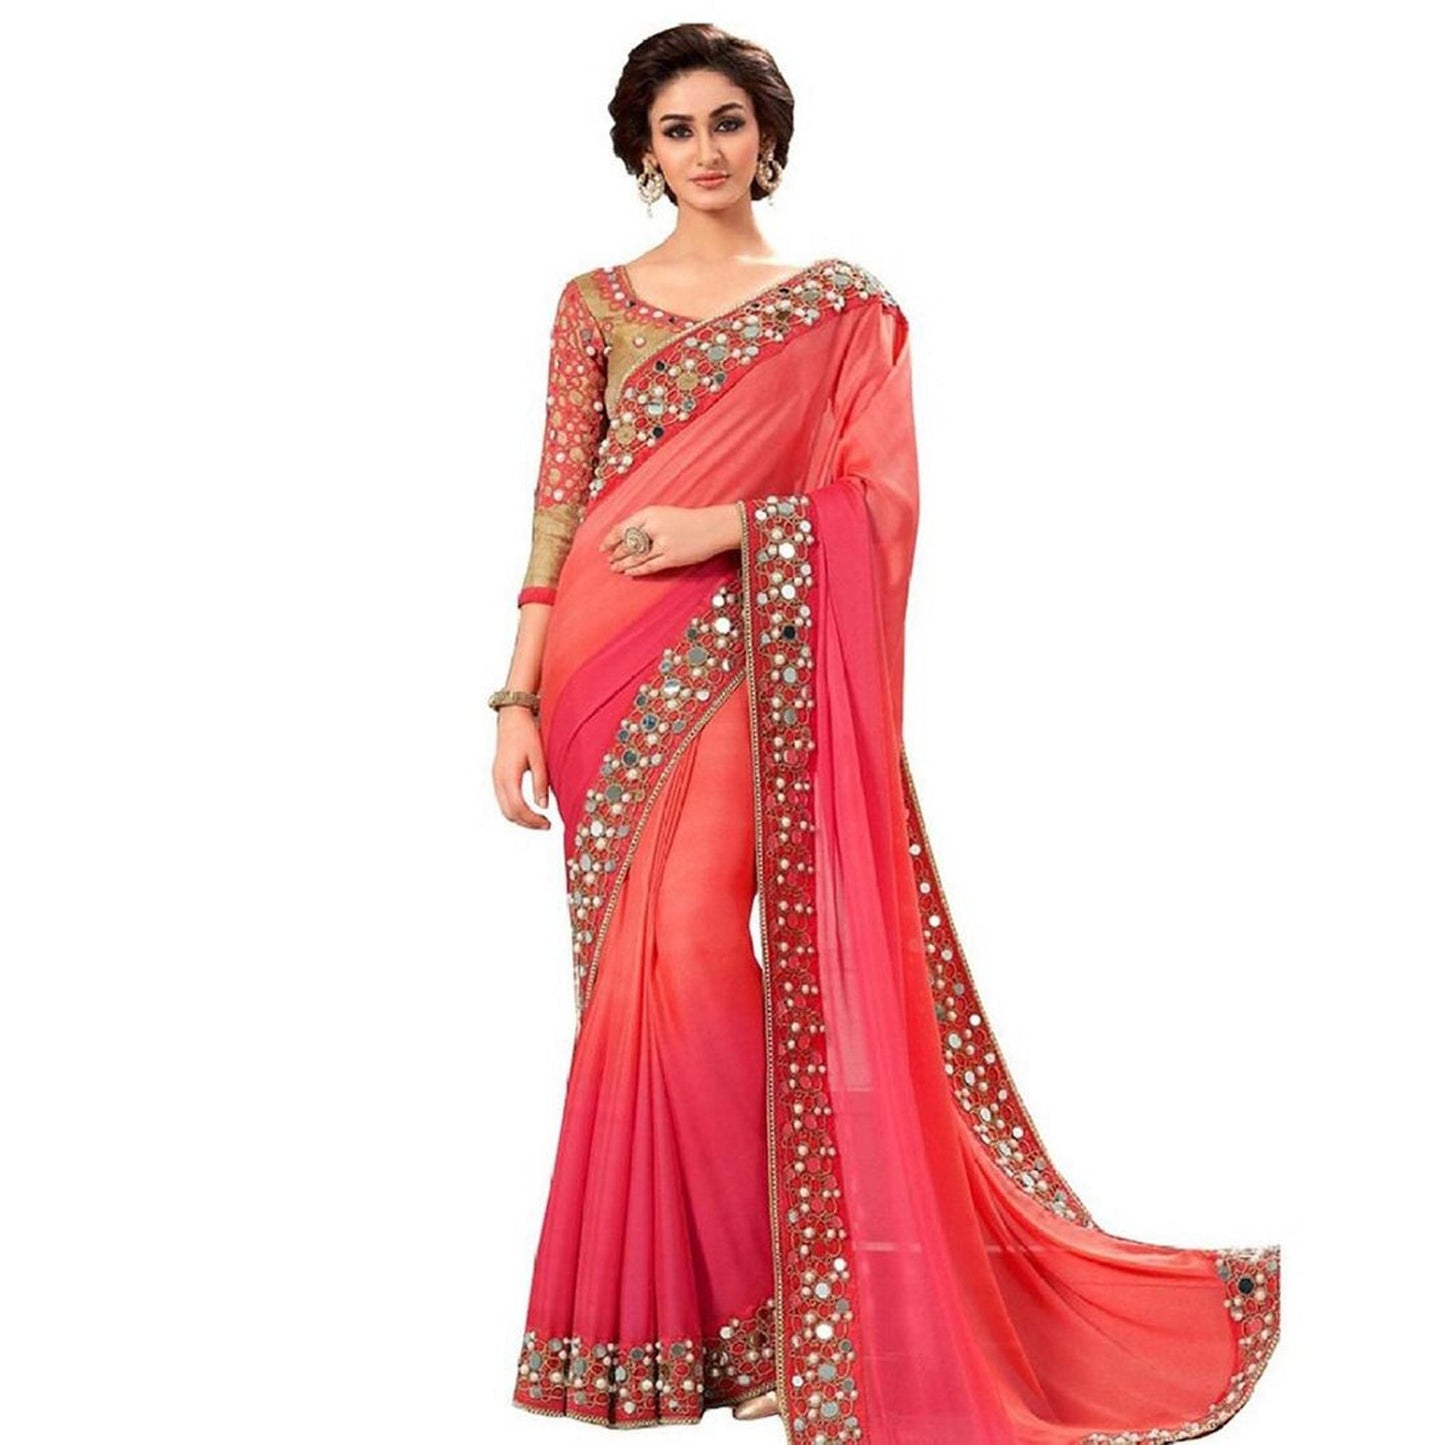 Ishin Poly Georgette Pink Beads and Stones Embellished Women's Saree